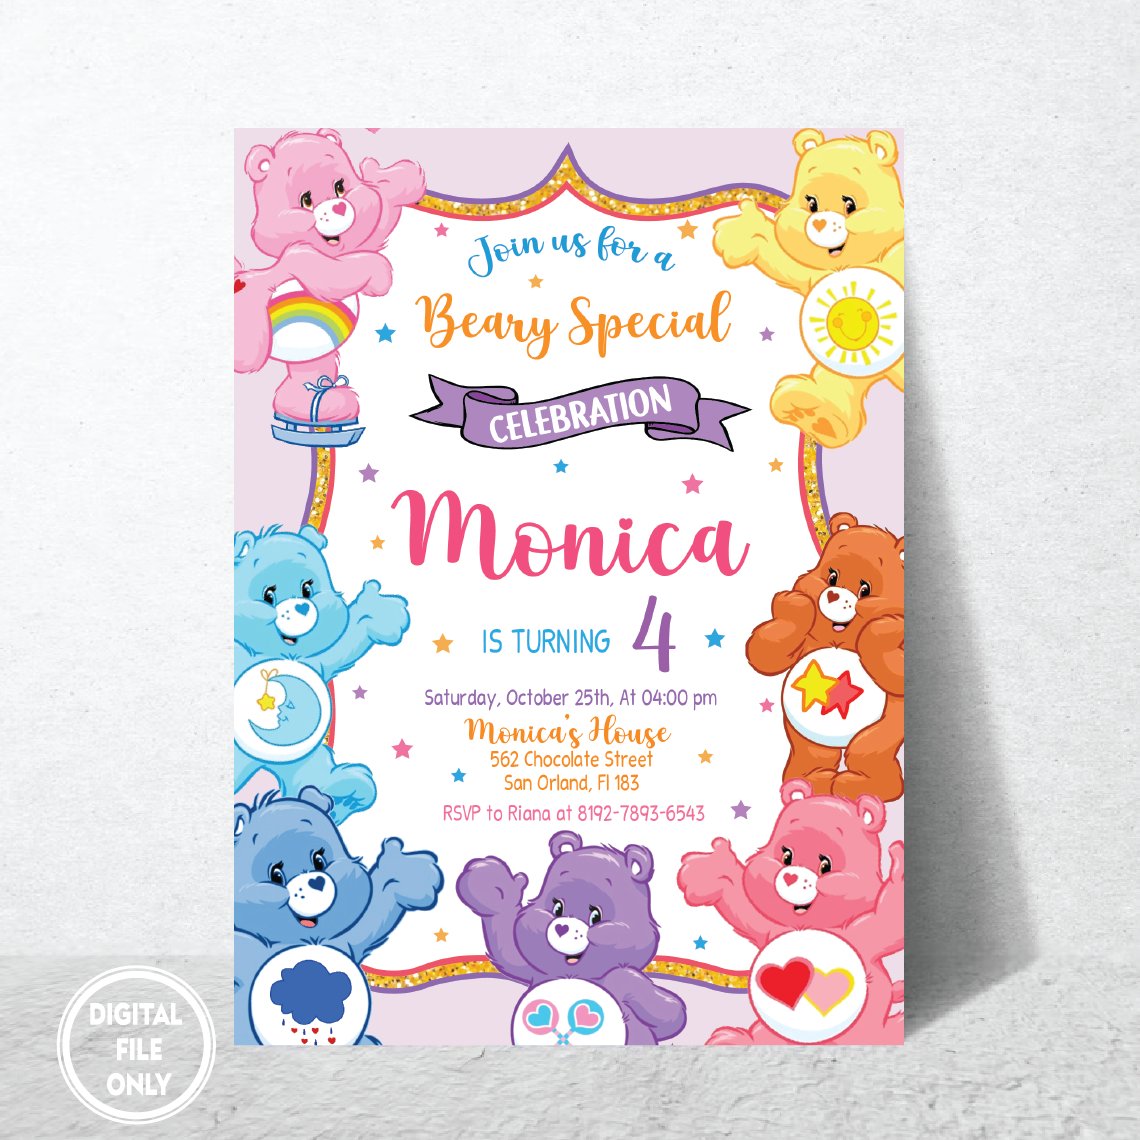 Personalized File Care Bear Invitation Birthday Party Invitation, Bears Invitation Digital Invitation, Birthday Invite, Instant Download, PNG File Only